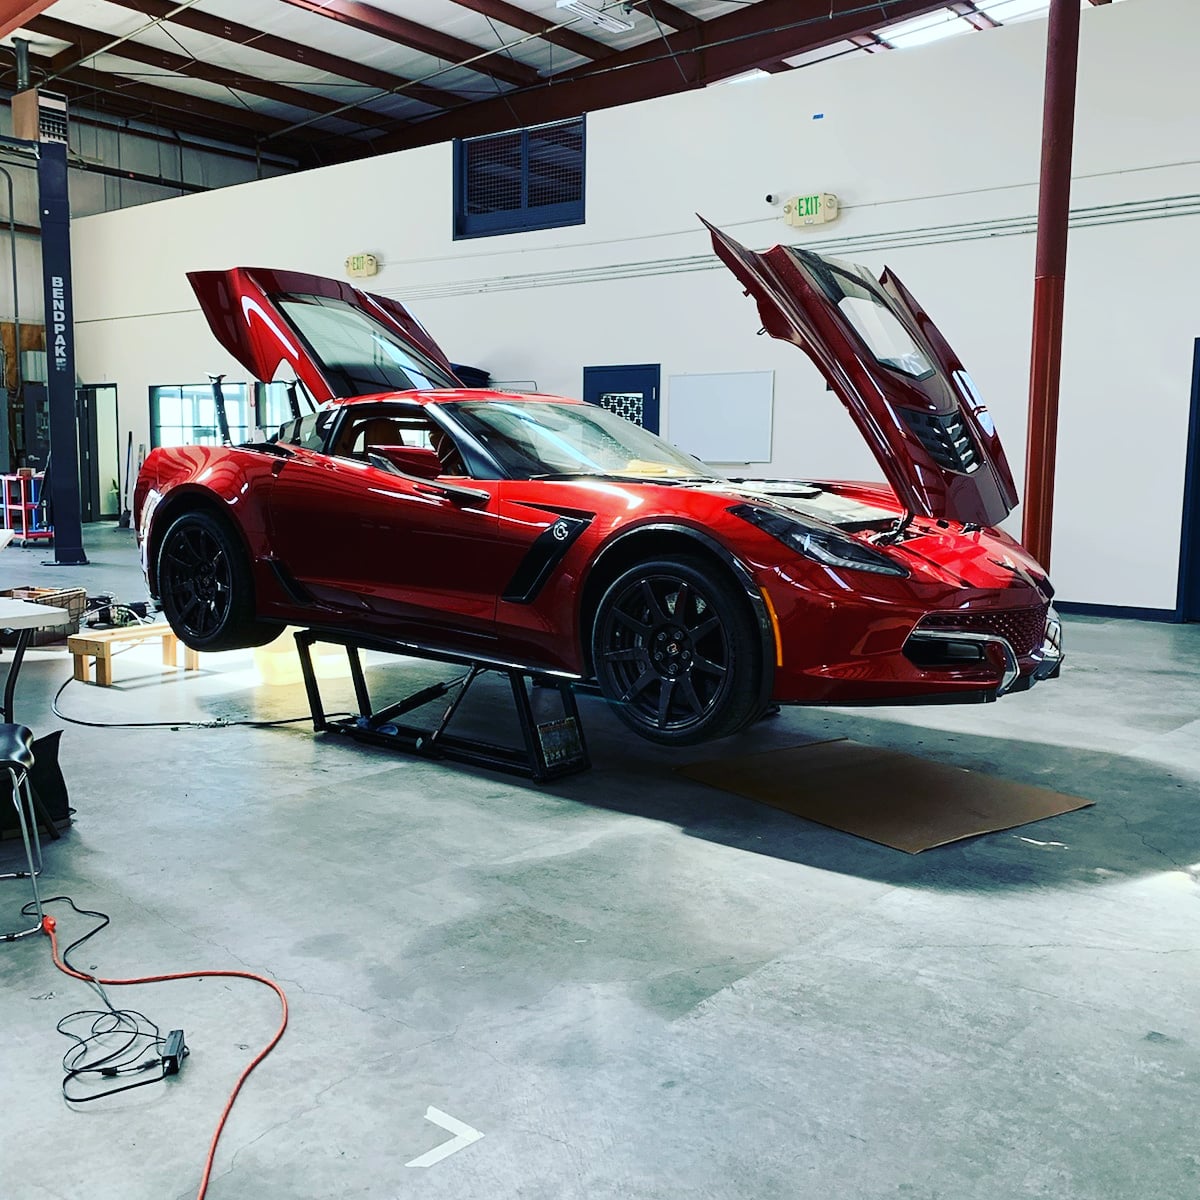 Prepping the #GXE @staflsystems for @randypobst at @ThunderhillPark

#Genovation #itsElectric #electricCorvette #Amazing_Cars #AmazingCars #AutoGeSpot #Hypercar #Supercar #BlackList #ExoticPerformance #CarSpotting #NoteWorthyExotics #ExoticCar #AllAboutSupercars